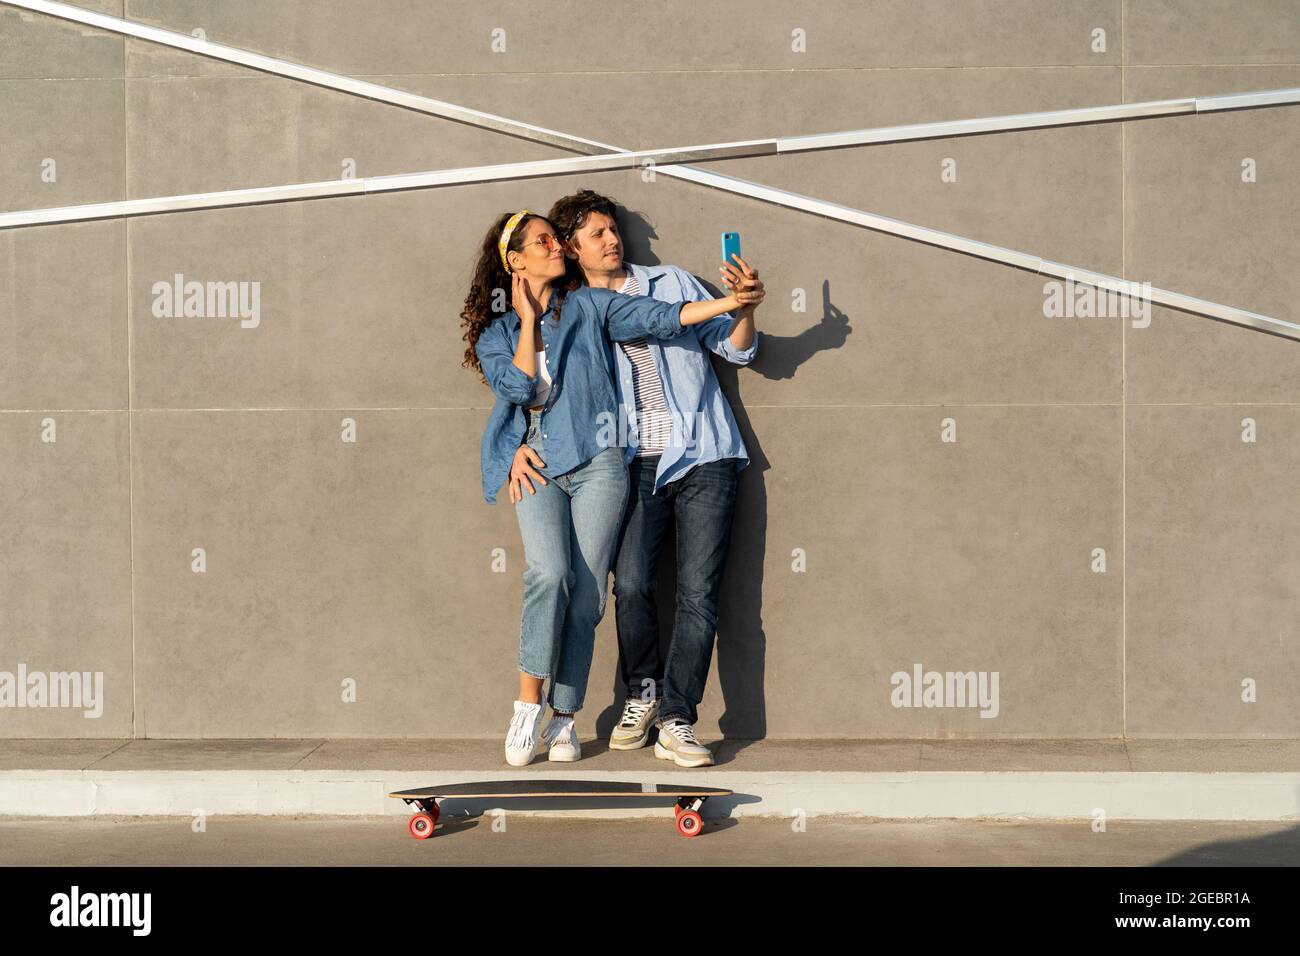 Young couple take selfie photo on smartphone over urban wall with longboard on ground happy smiling Stock Photo